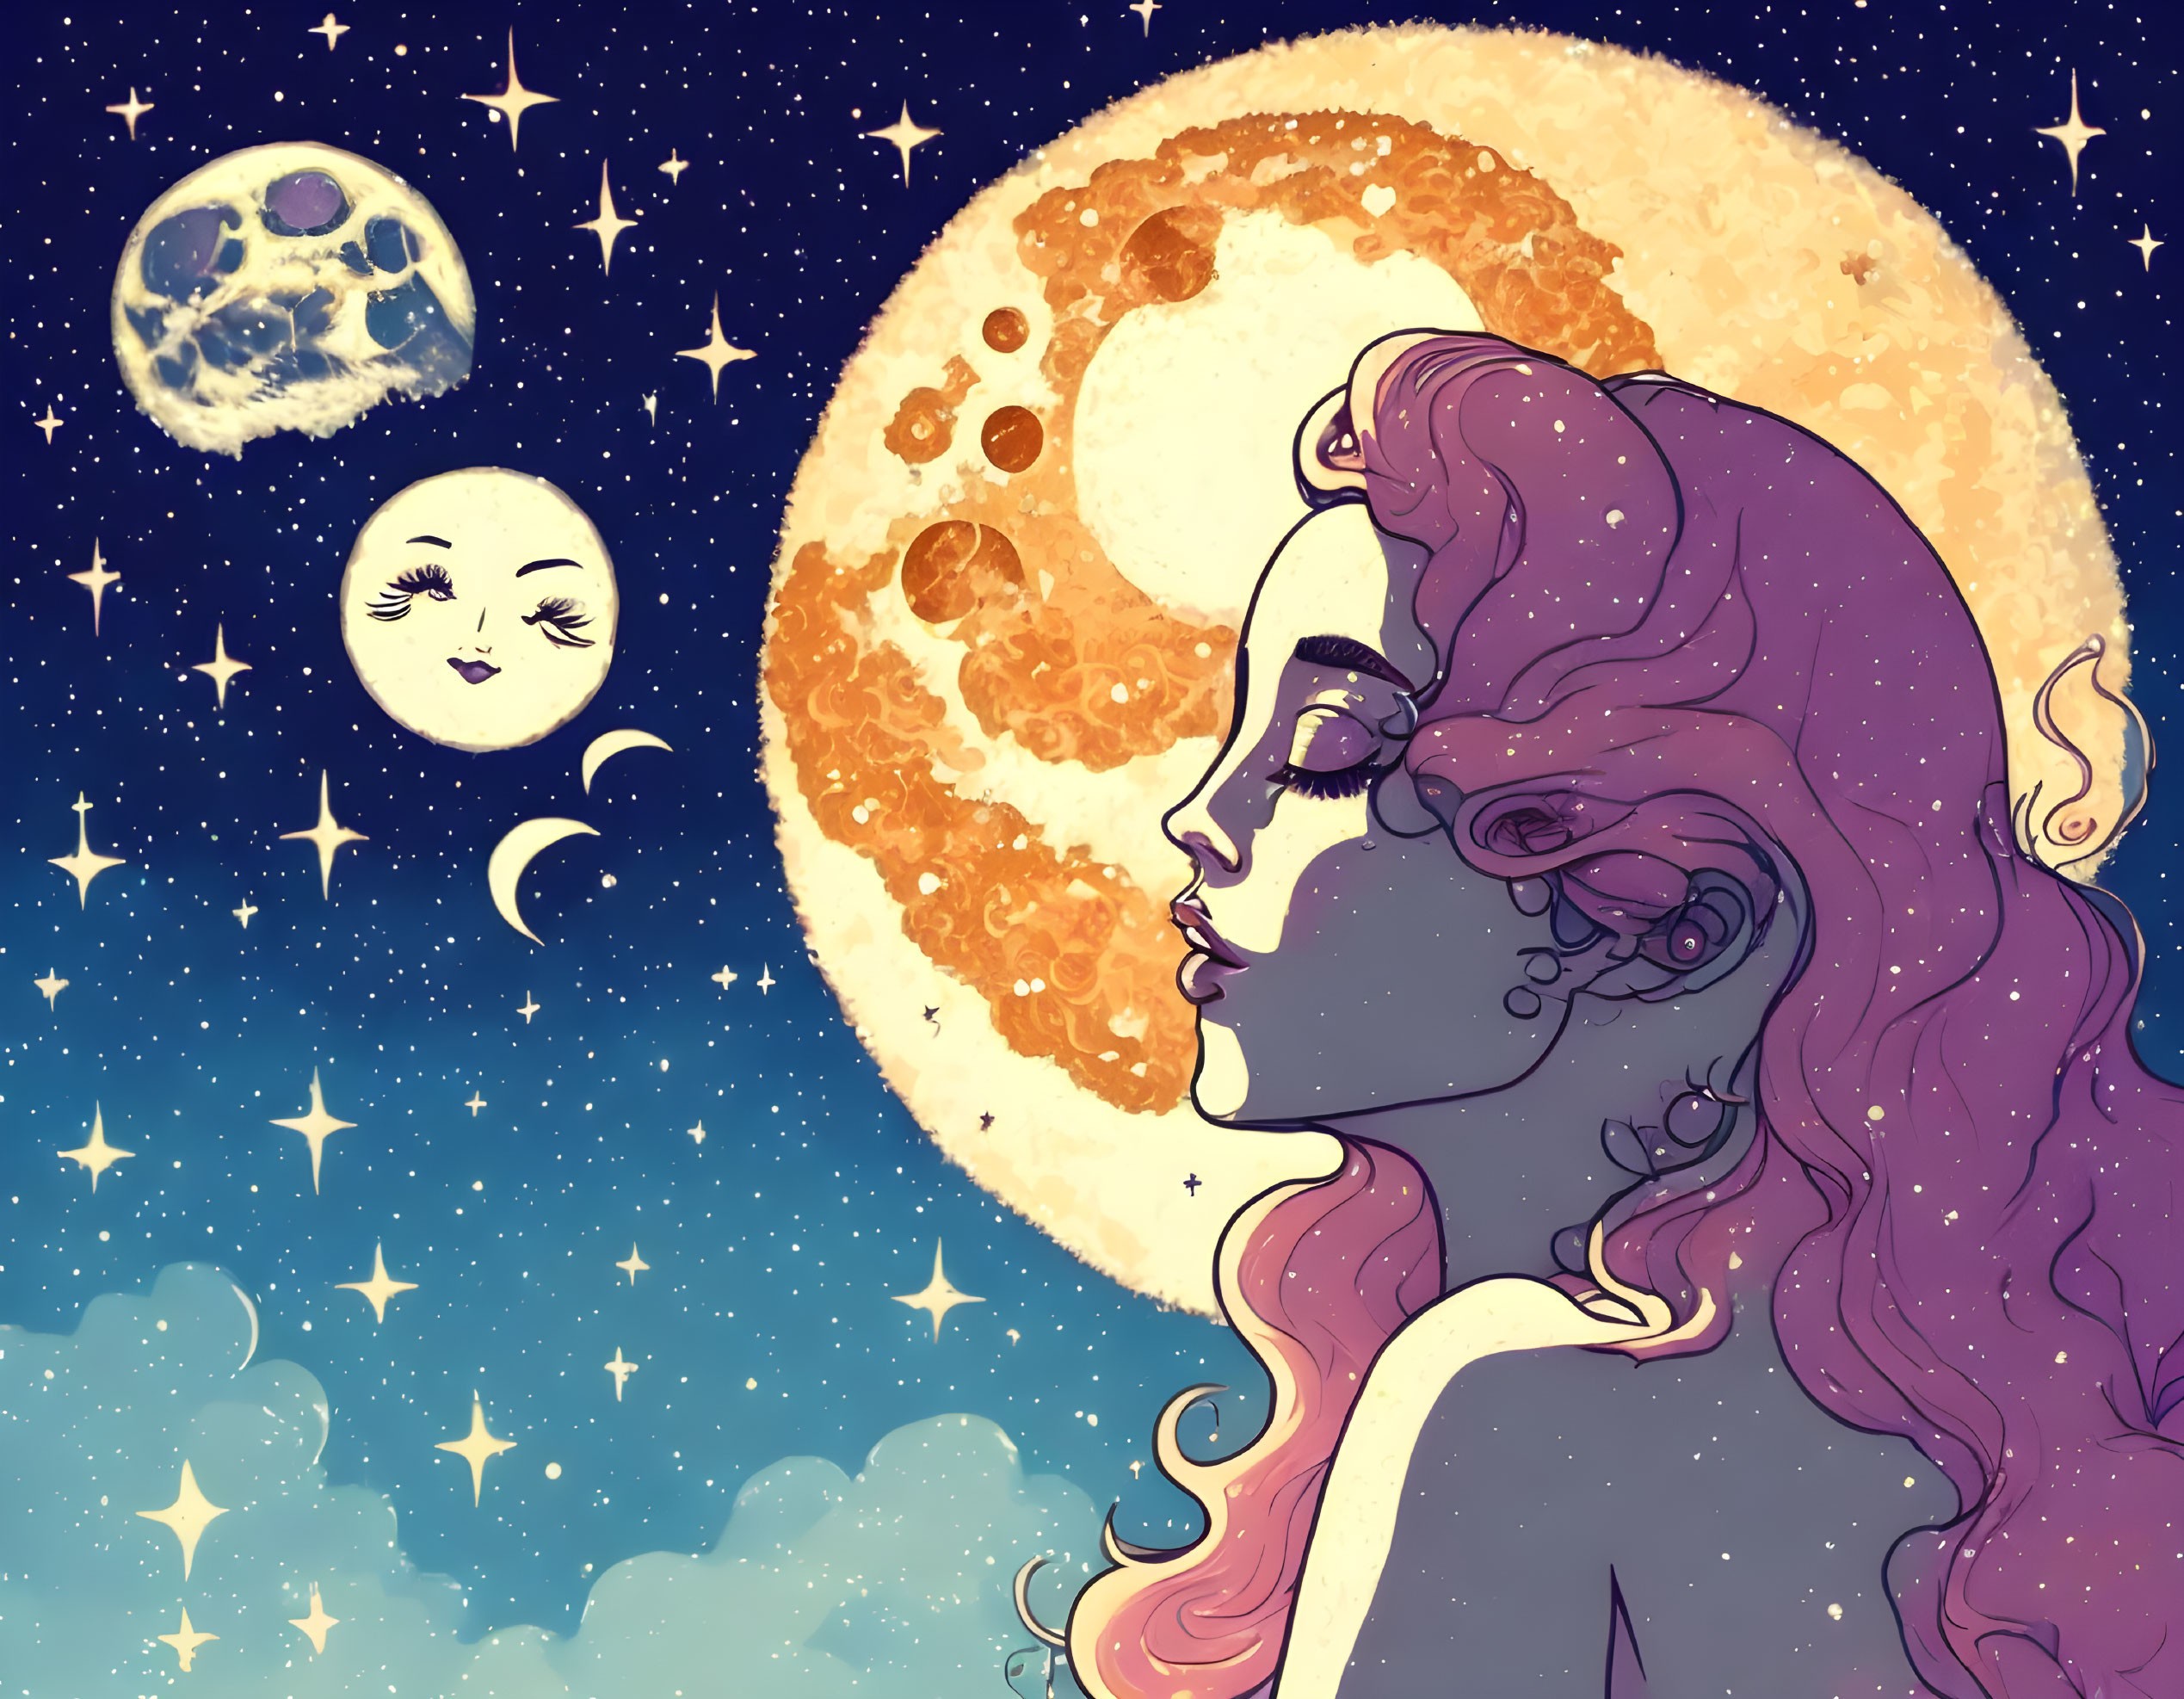 Stylized purple-haired woman profile against moon and stars